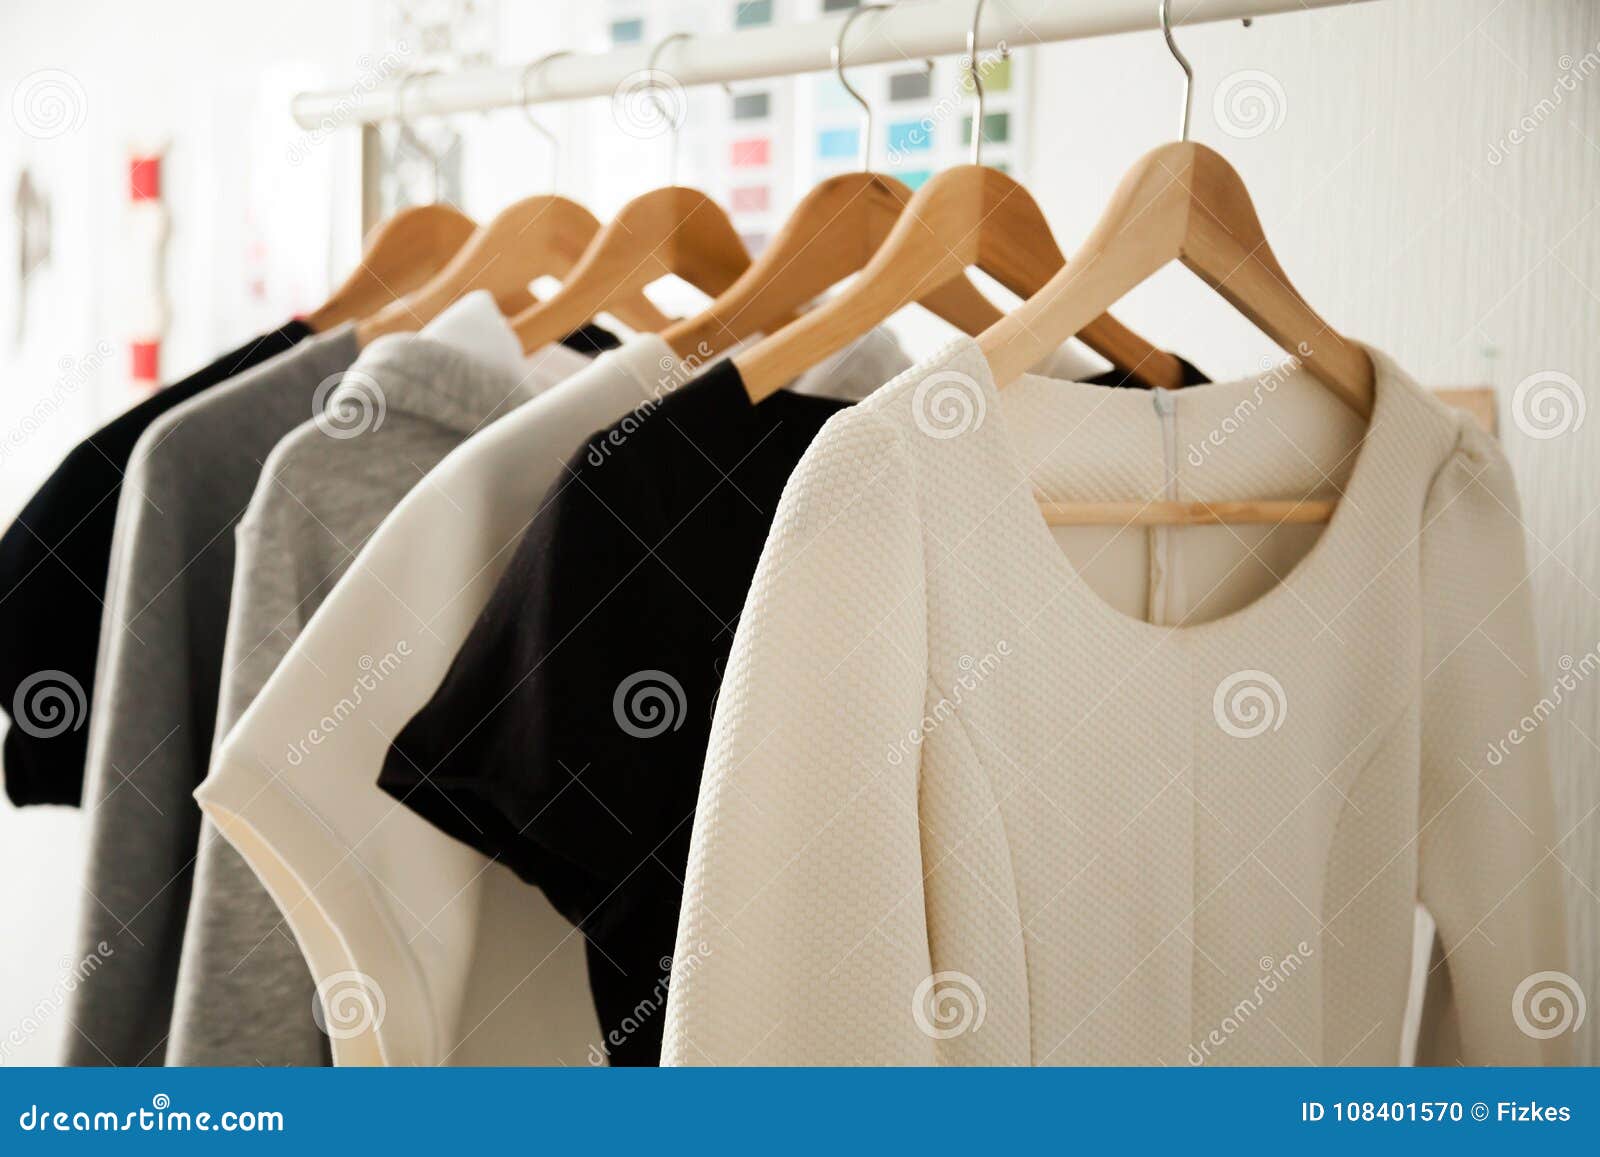 women clothes hanging on hangers clothing rails, fashion 